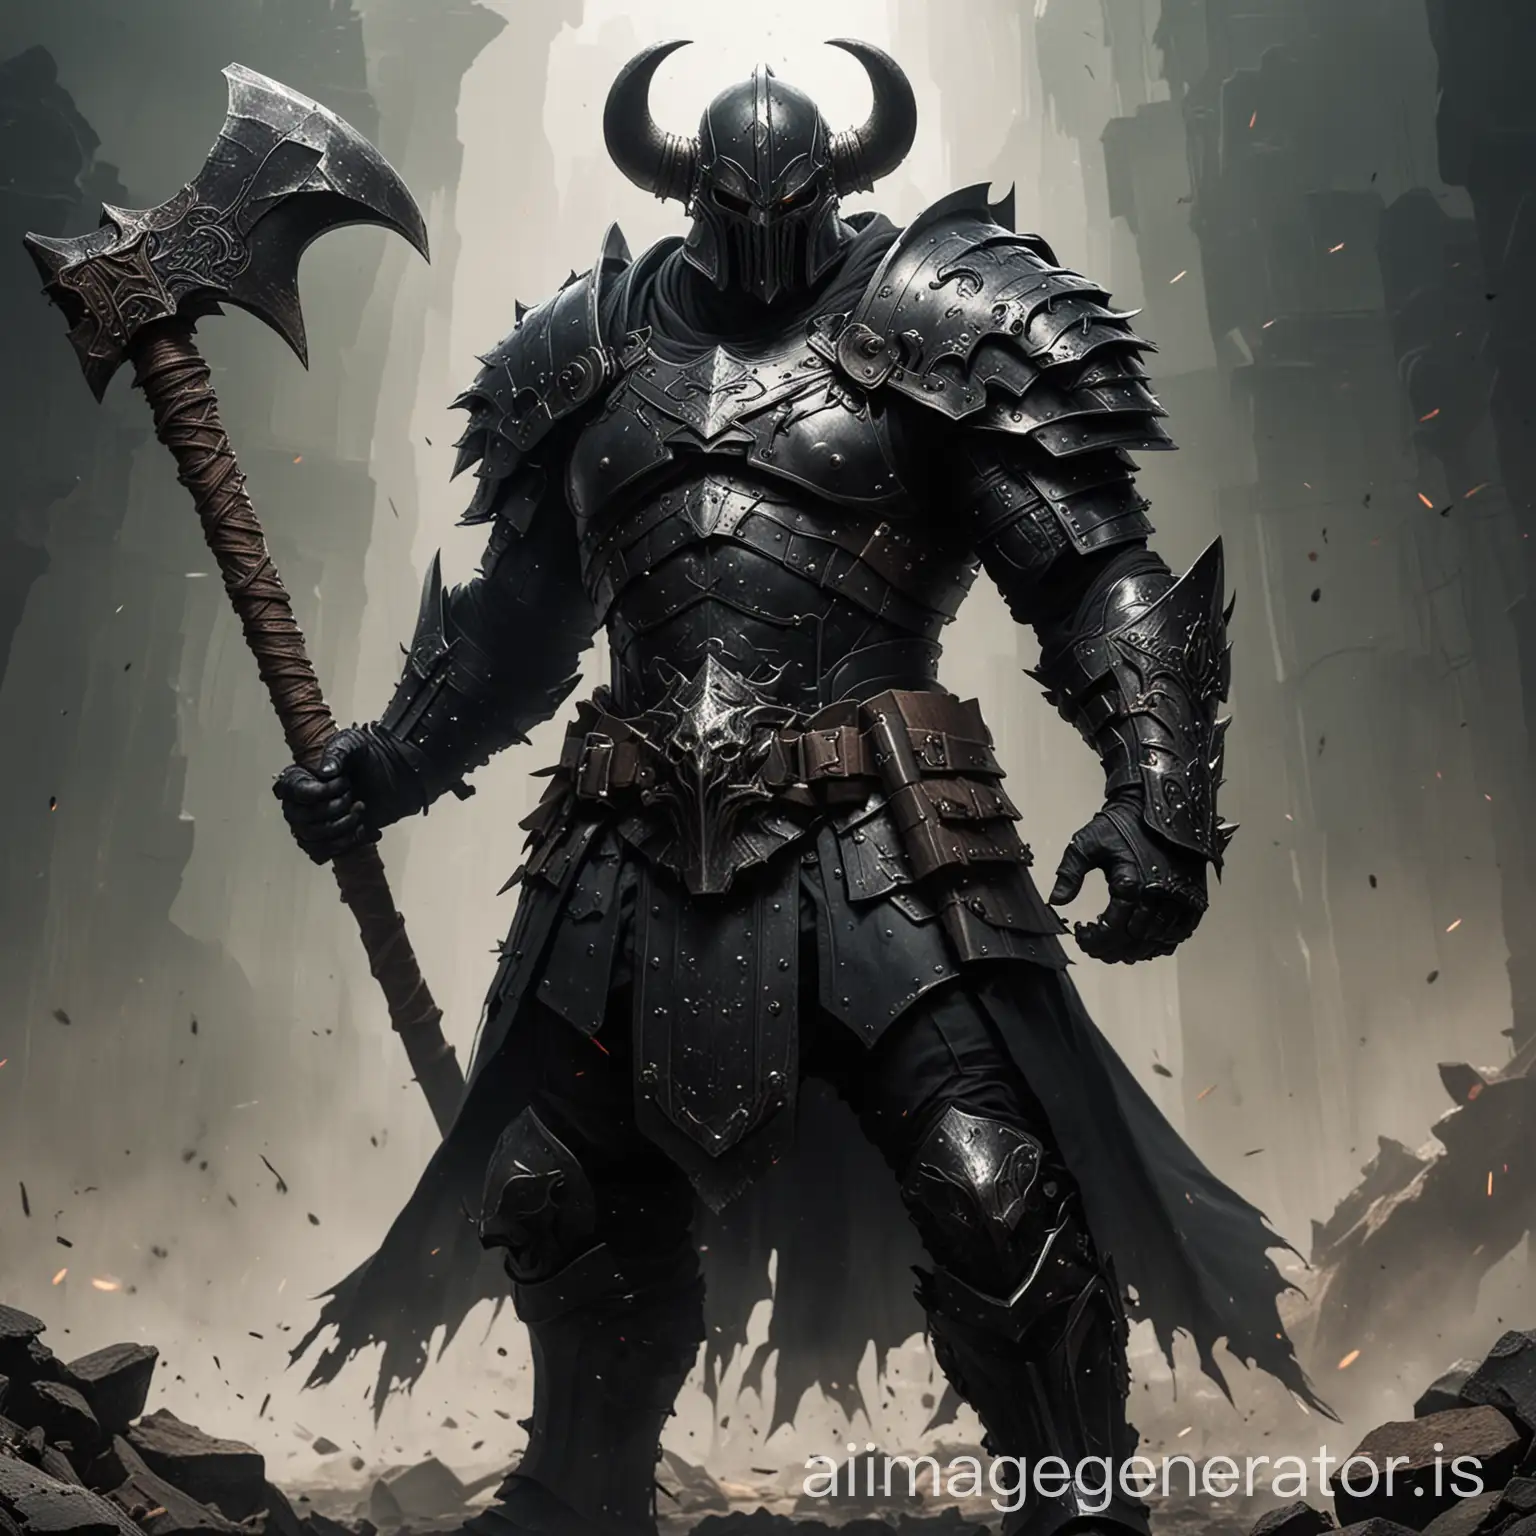 A massive man, wearing intimidating black armor and a double ax.